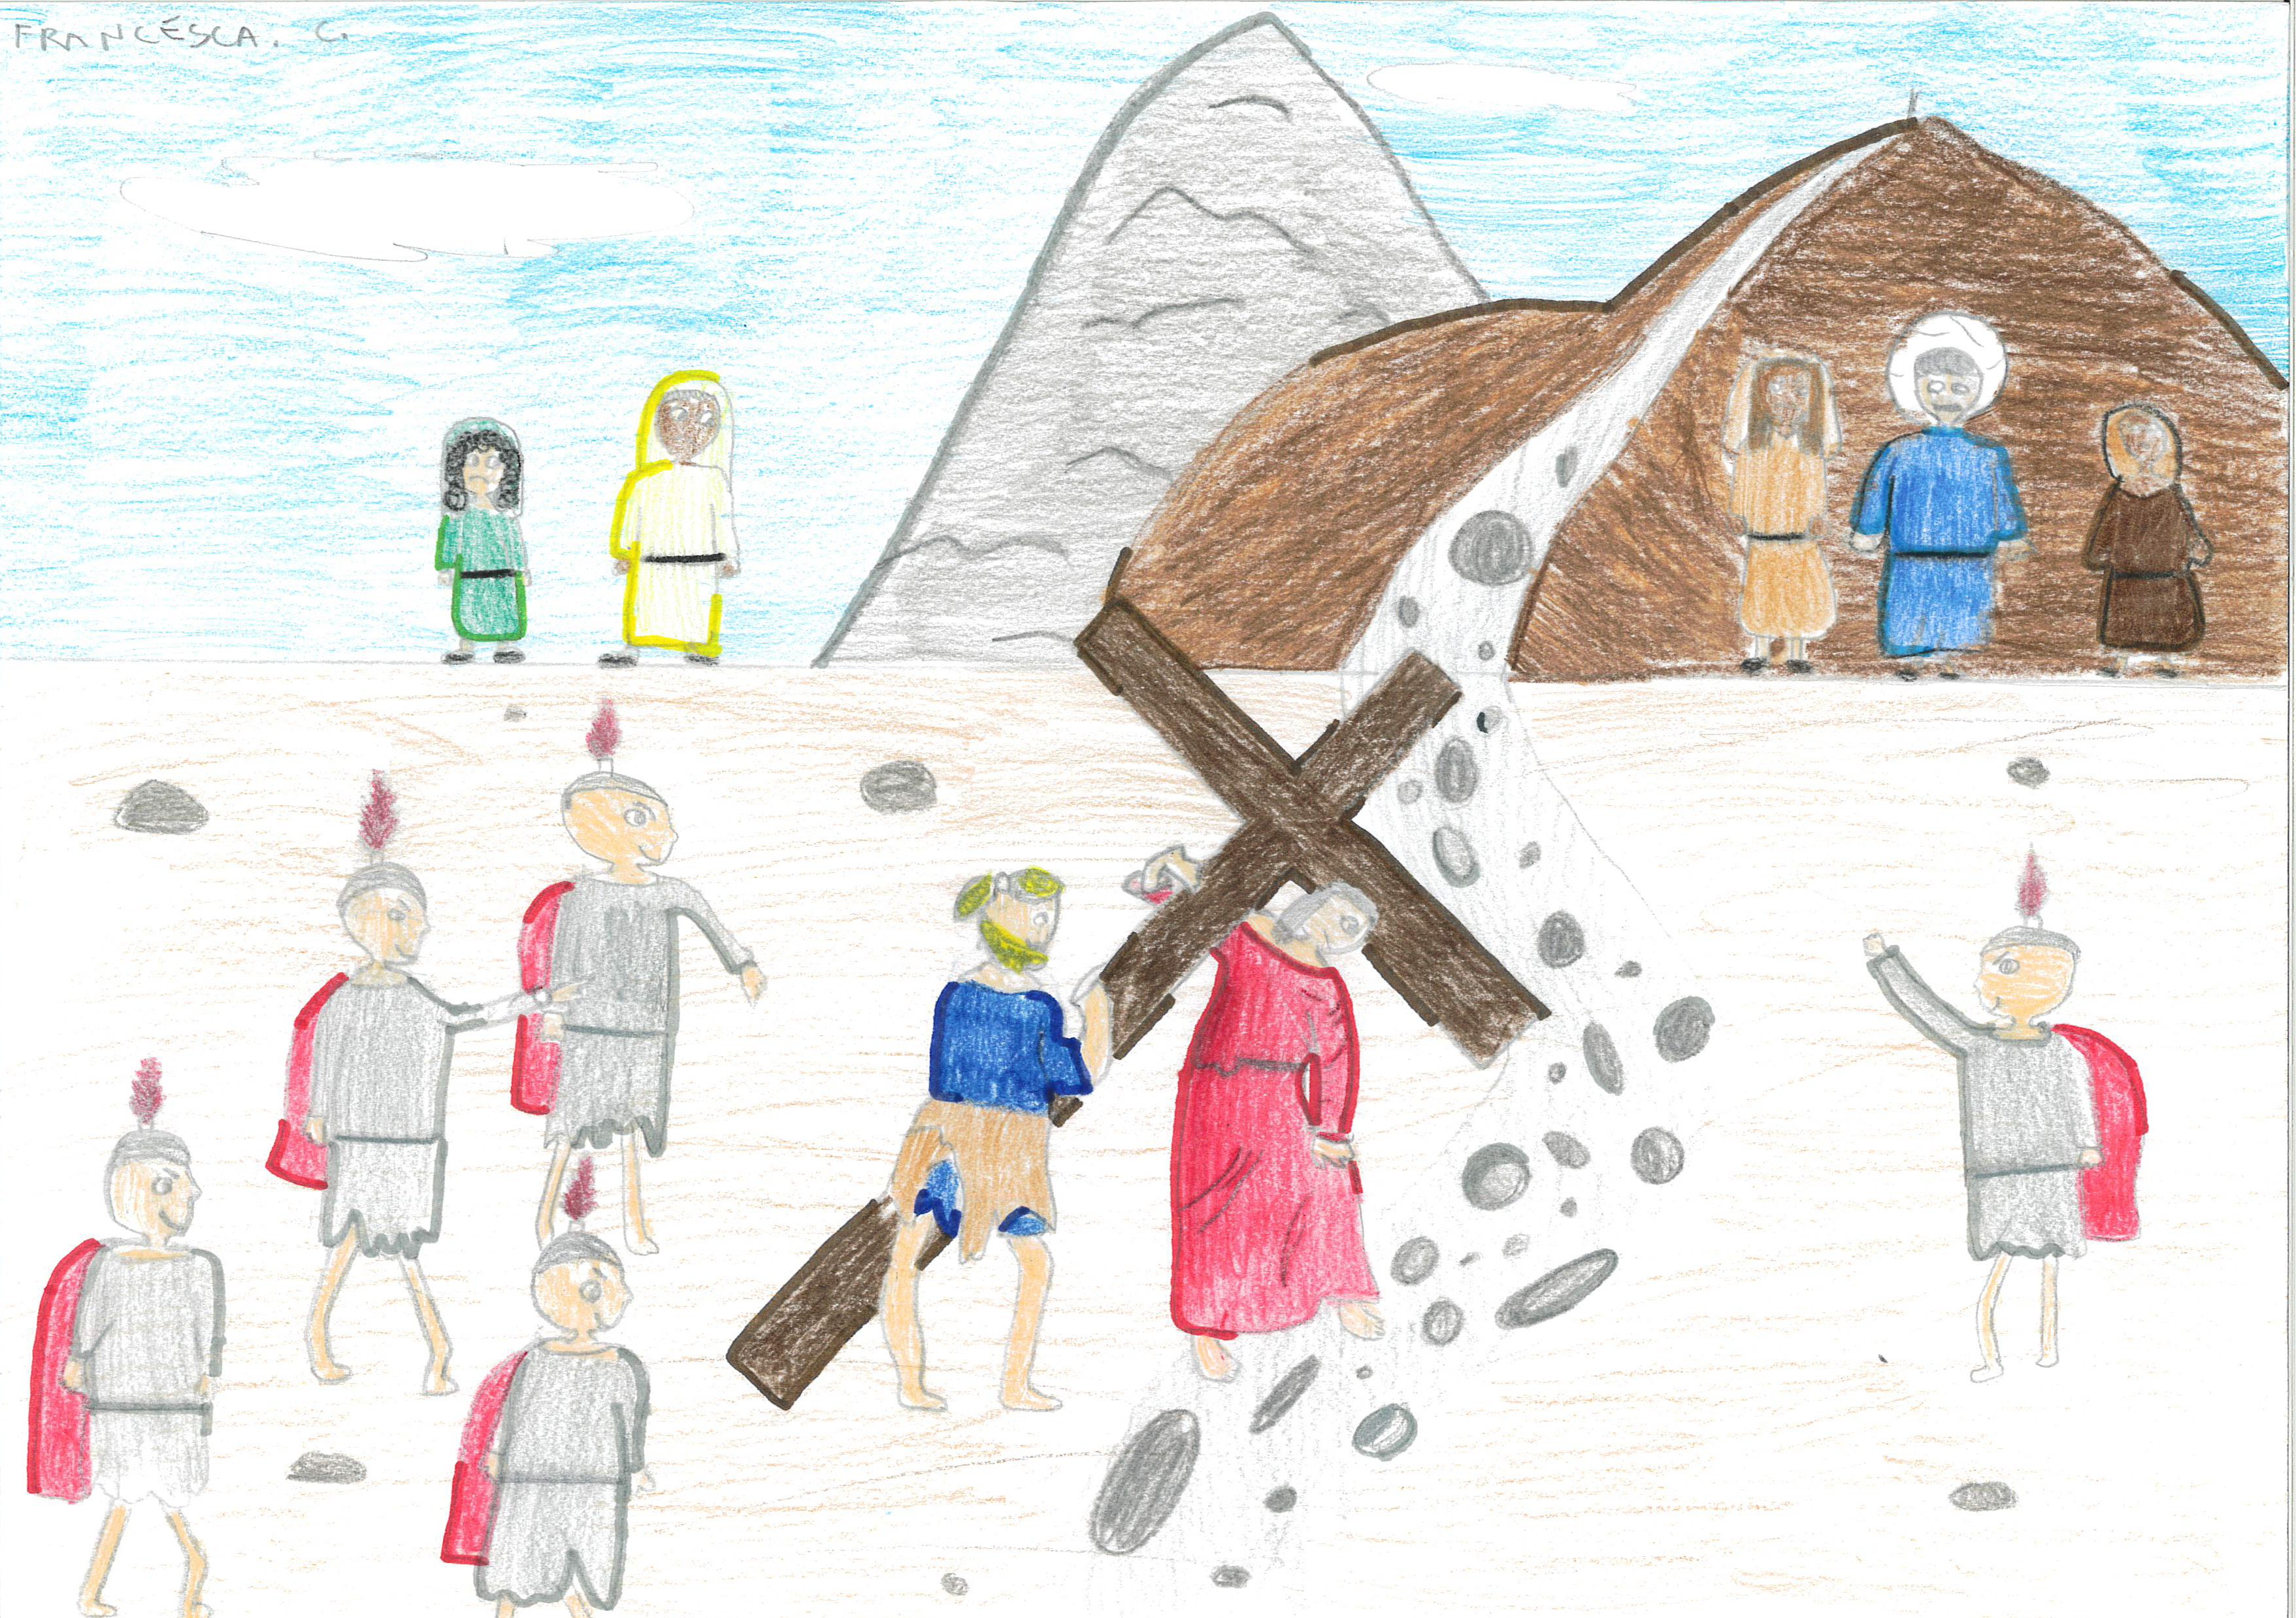 Pope Francis will use reflections and drawings from kids for this year